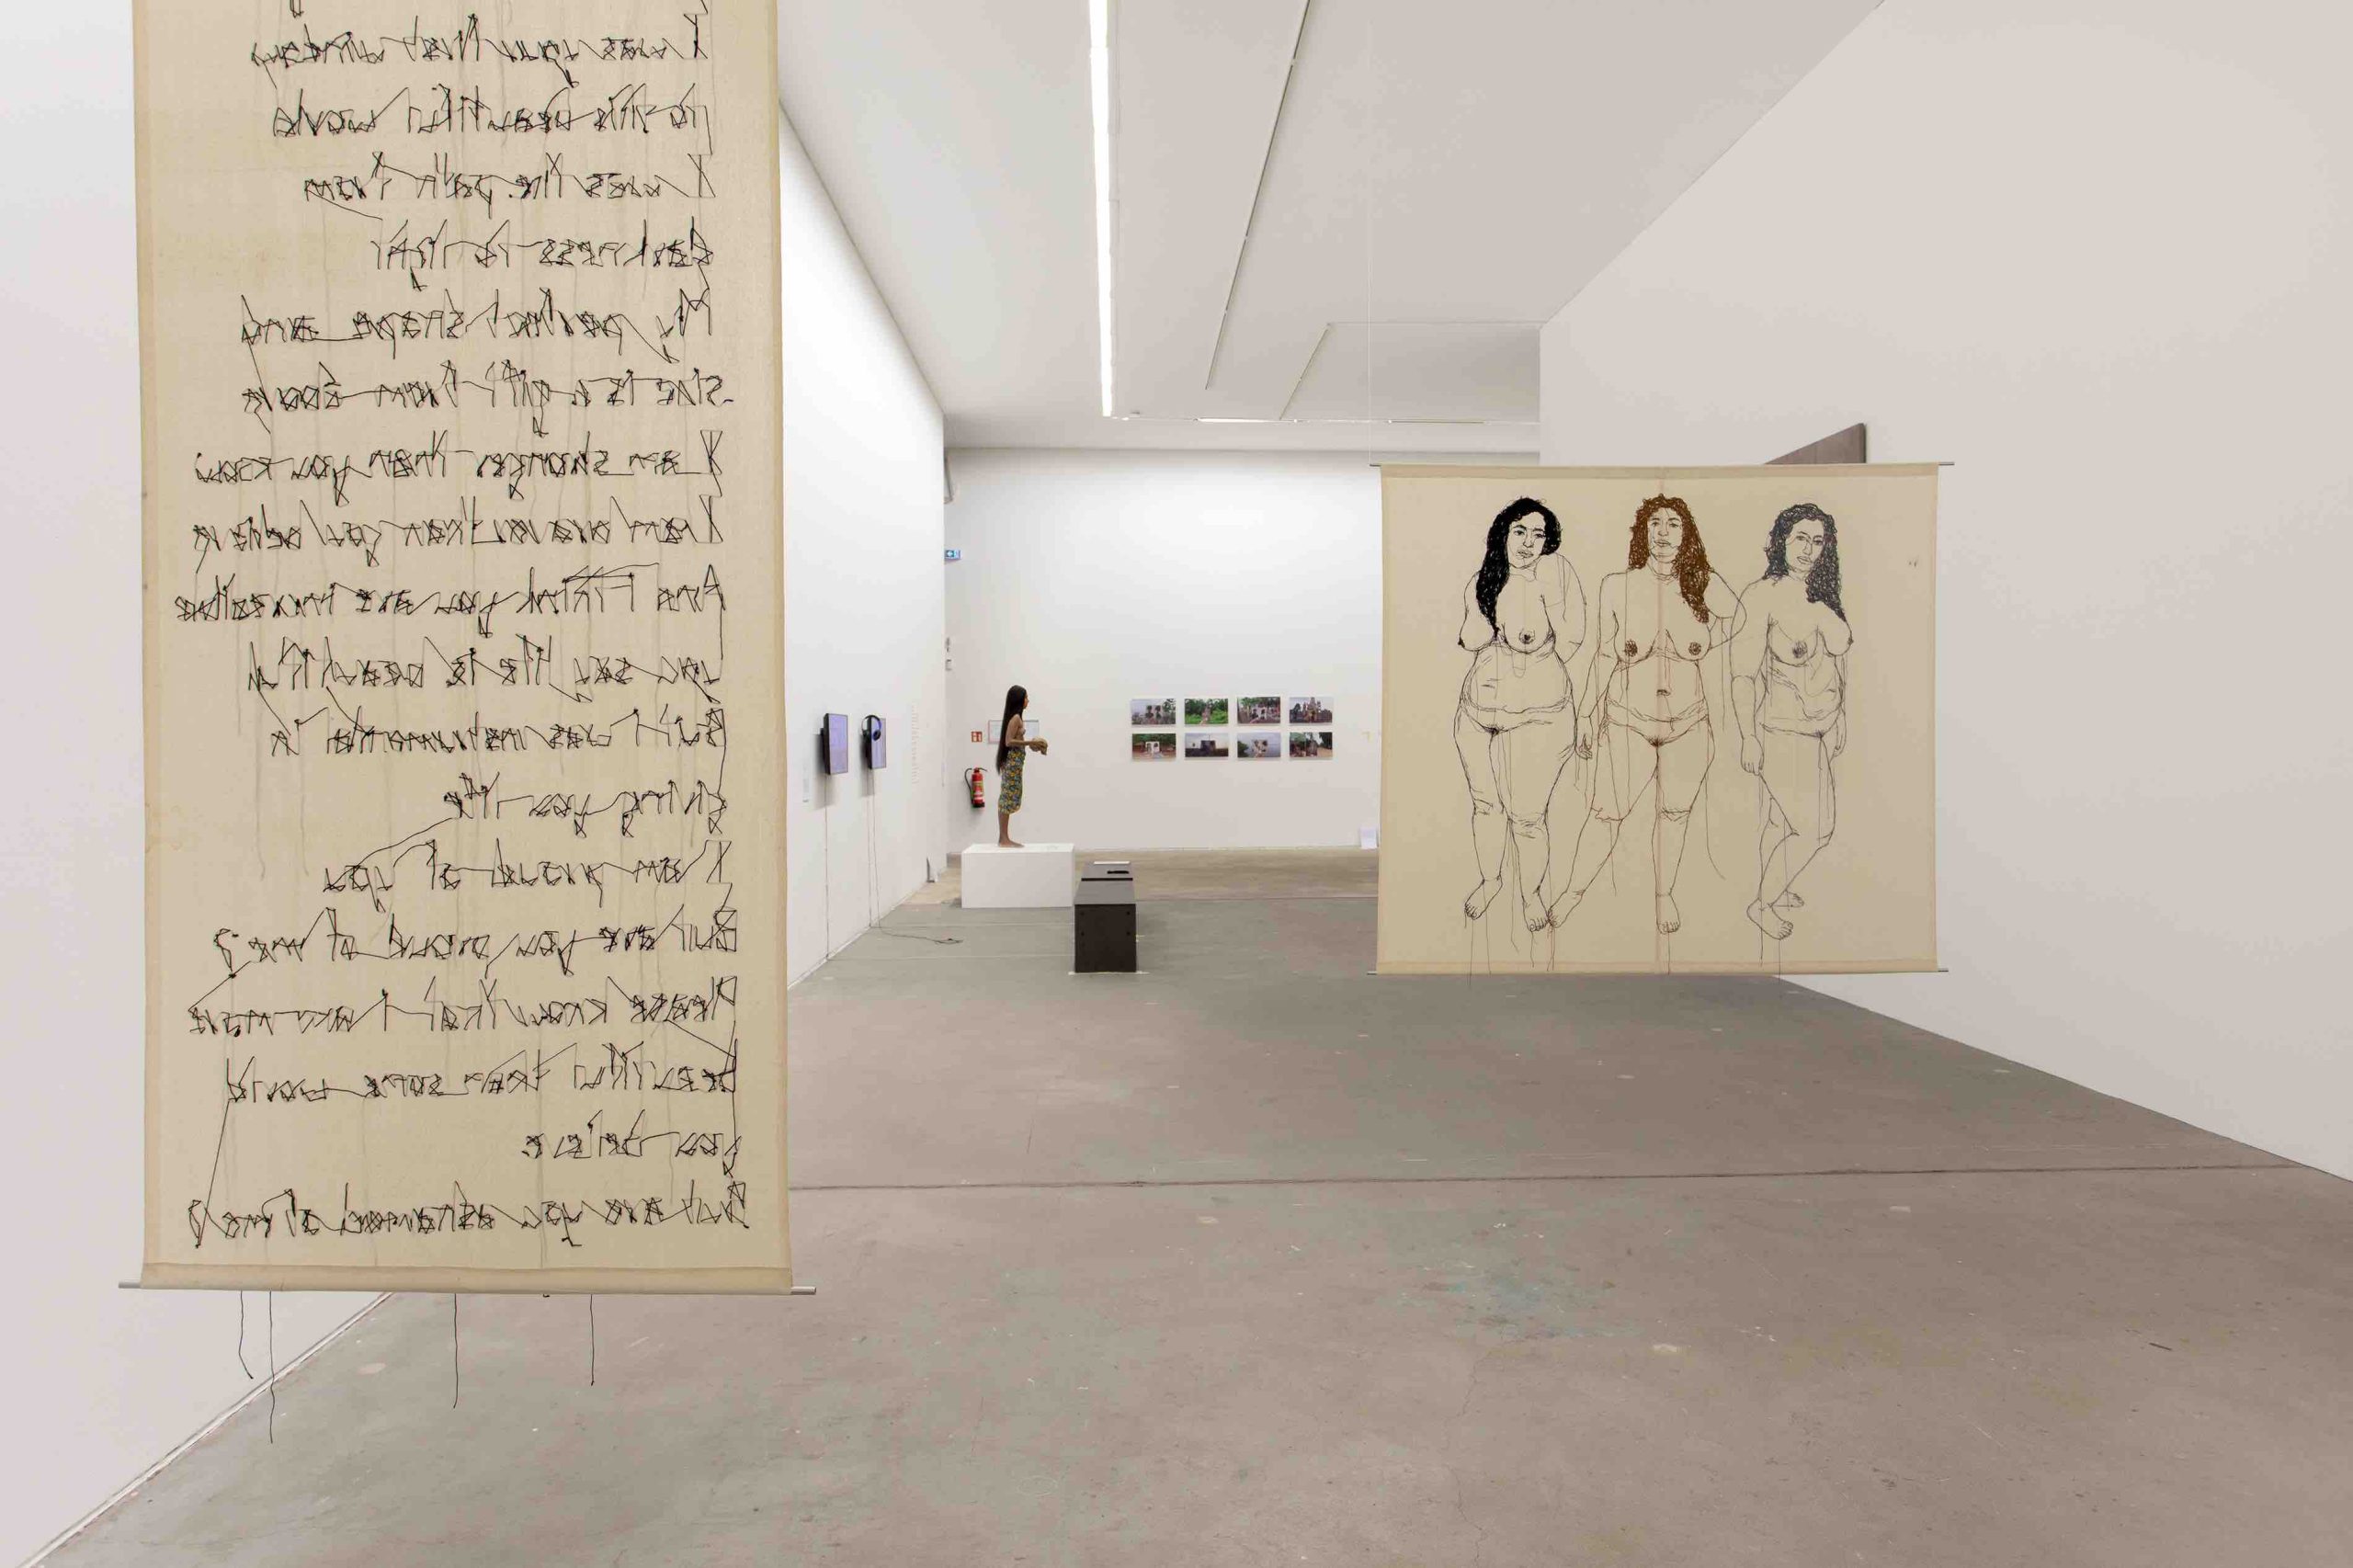 KW Institute for Contemporary Art, 11.06.-18.09.2022

Photo: Silke Briel

 

Mayuri Chari, I Was Not Created for Pleasure 13 (Monologue of a Vagina), 2017

Thread, Stitching on cloth

 

Deneth Piumakshi Veda Aarachchige, Self-Portrait as Restitution – from a Feminist Point of View, 2020

3D SLA-print of the artist’s body

 

Deneth Piumakshi Veda Arachchige, works from the series 136 years ago & now, 2019

Photographs

 

Mayuri Chari, I Was Not Created for Pleasure (Don′t Open I Am Nude Inside), 2018

Thread, Stitching on cloth